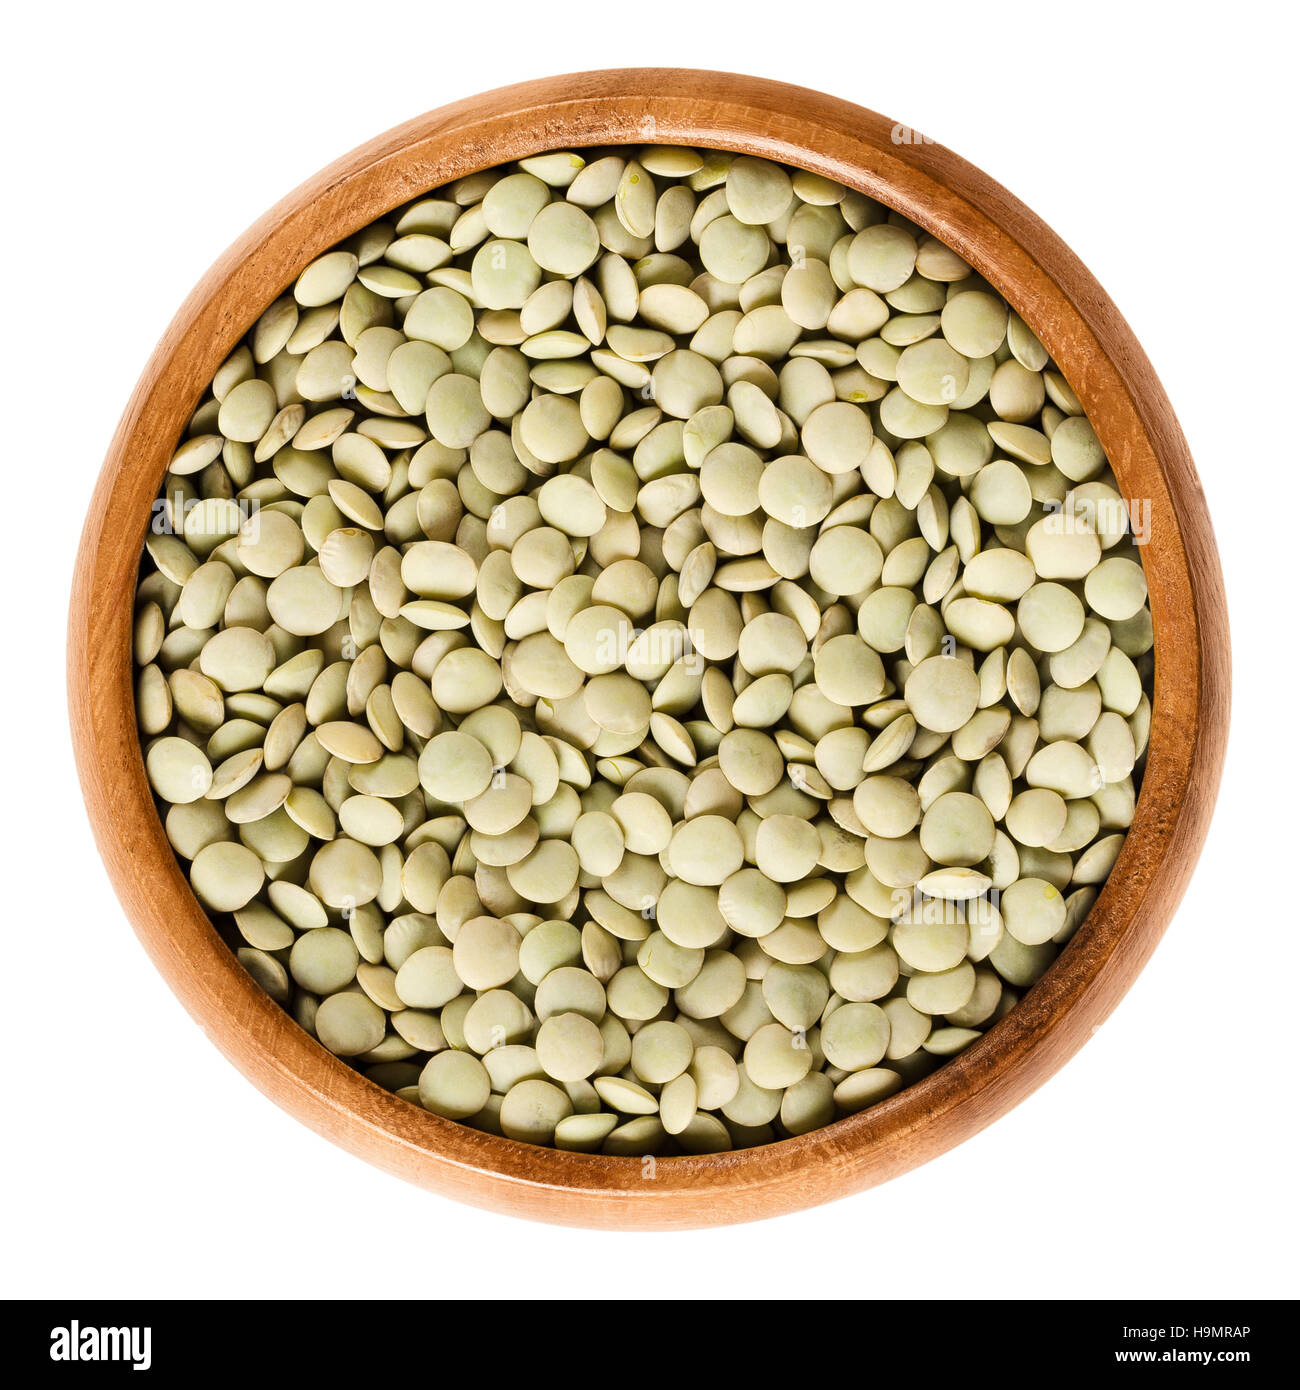 Green lentils in wooden bowl on white background. Seeds of Lens culinaris, edible raw pulses of the legume family. Stock Photo